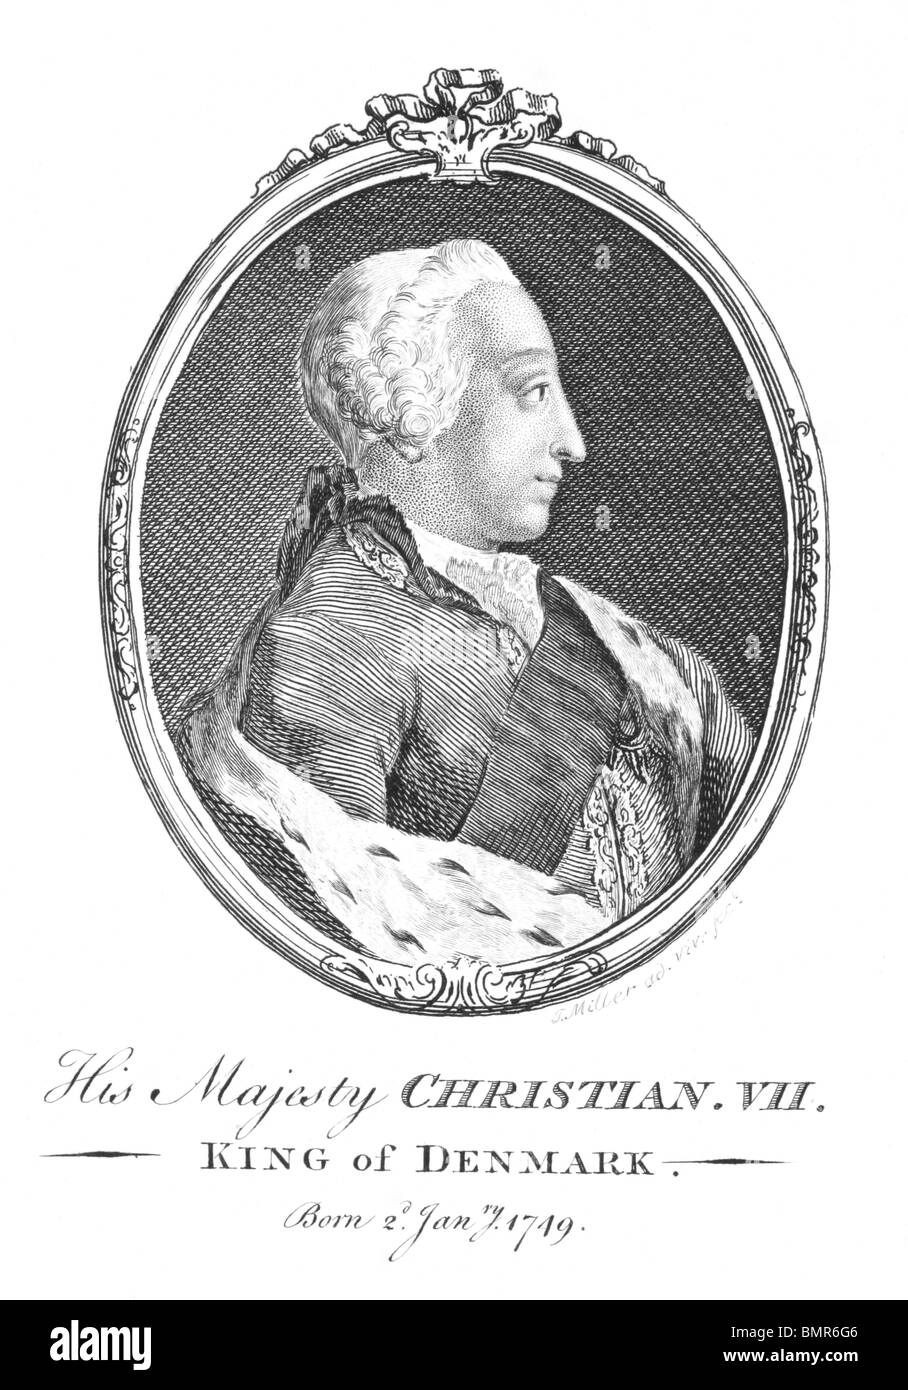 Christian VII (1749-1808) on engraving from the 1700s. King of Denmark and Norway during 1766-1808. Stock Photo